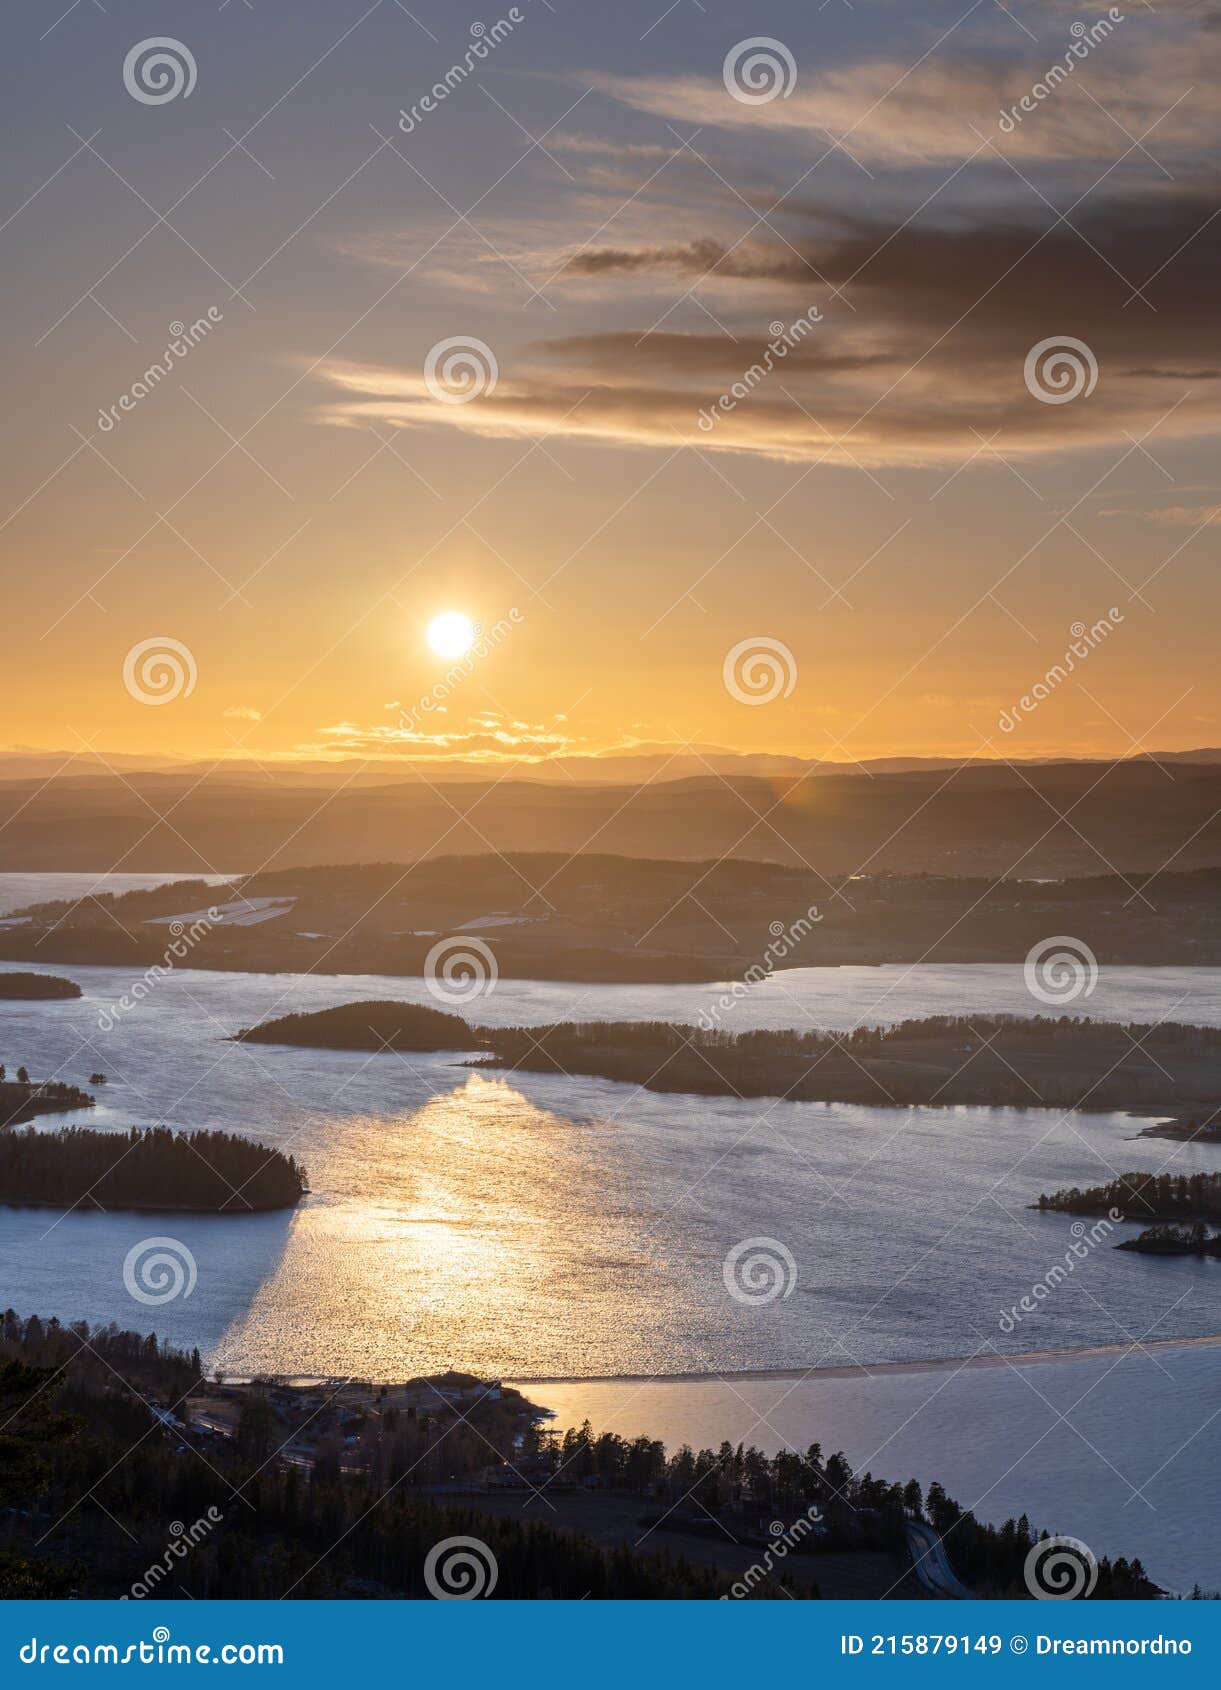 golden hour over steinsfjorden, a branch of lake tyrifjorden located in buskerud, norway. view from kongens utsikt royal view at